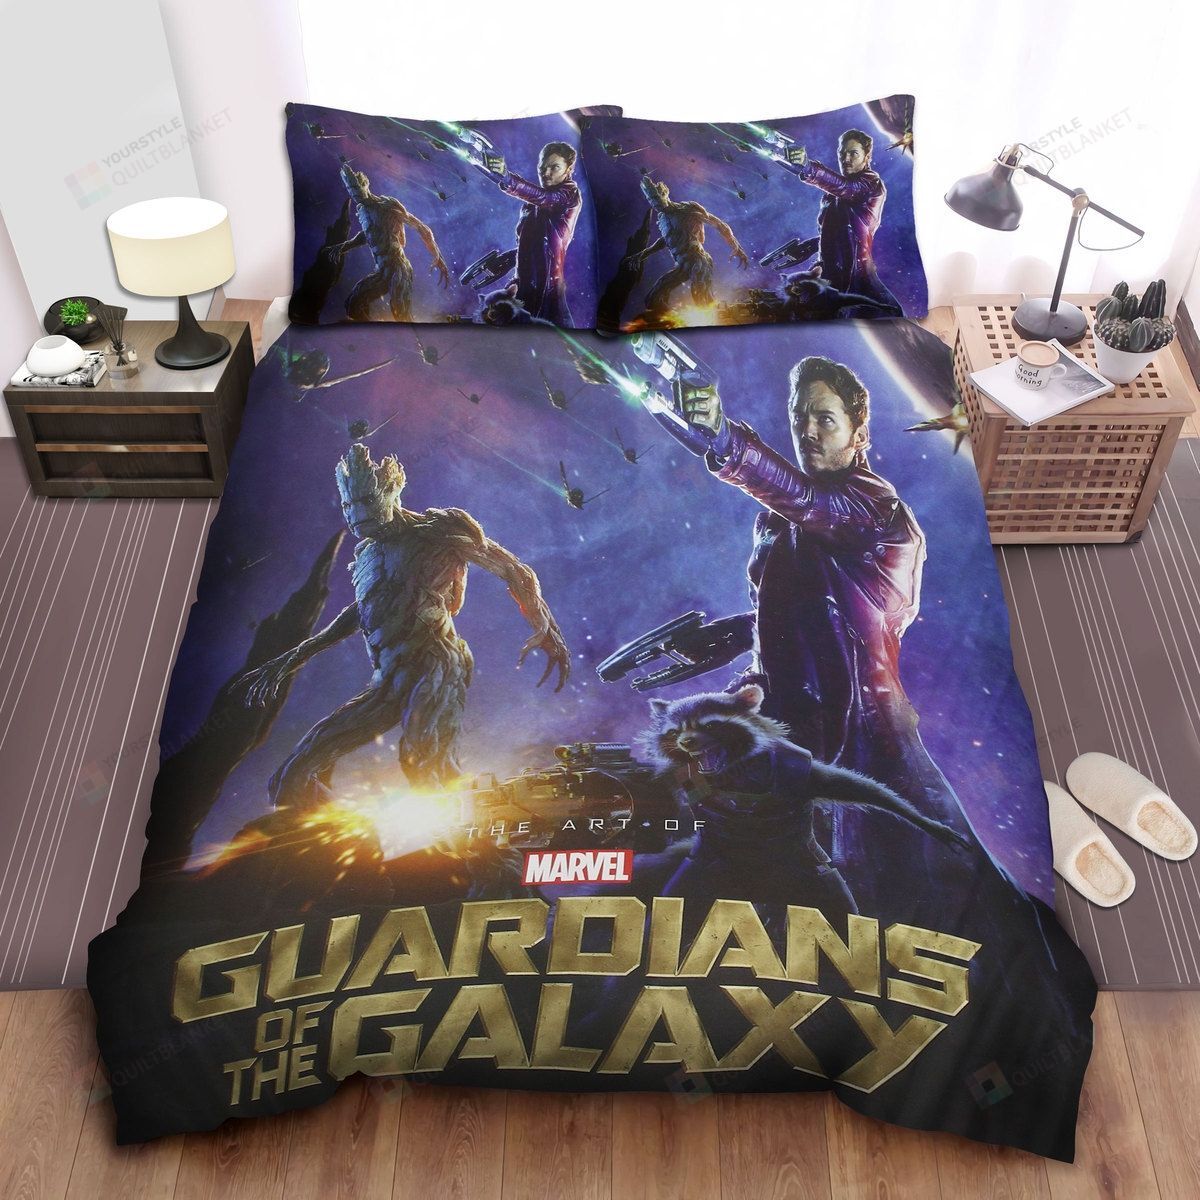 Marvel Guardians Of The Galaxy Star-Lord Groot And Rocket Racoon Bed Sheets Spread Comforter Duvet Cover Bedding Sets